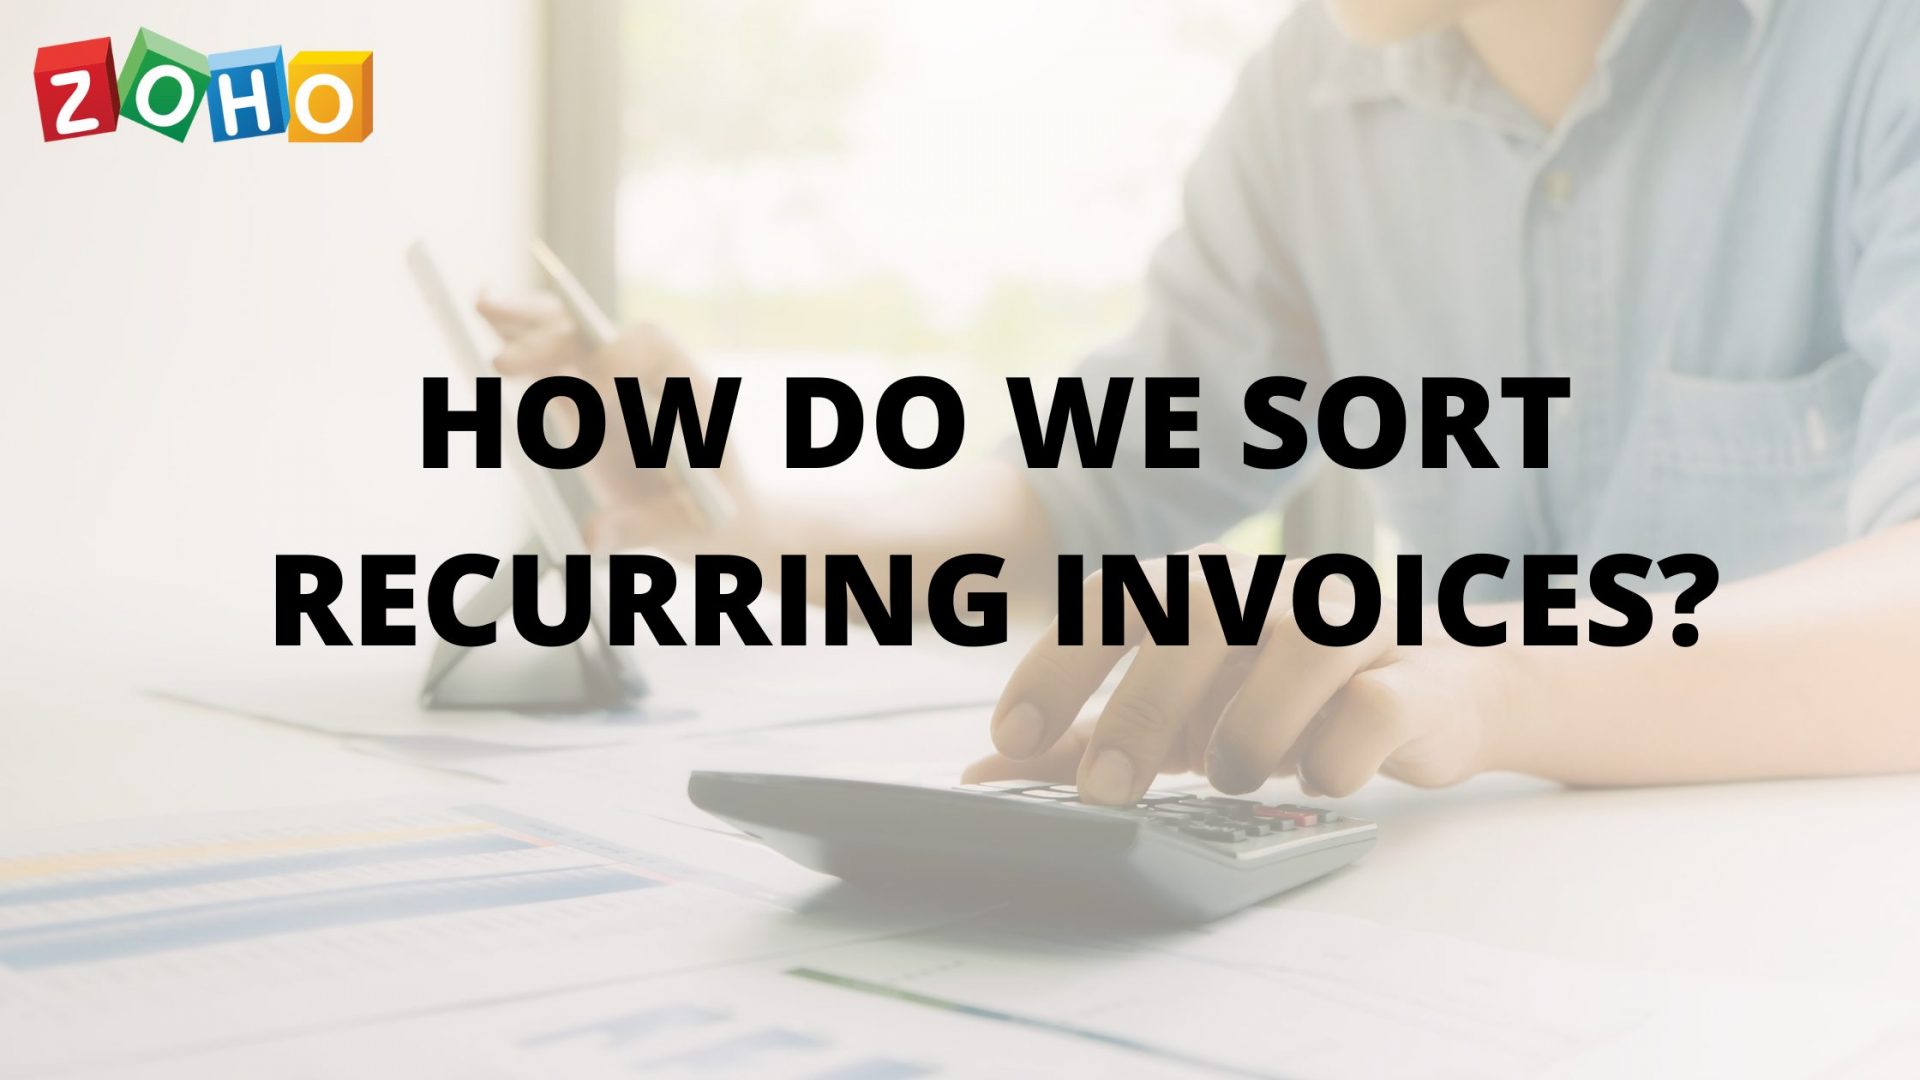 How do we sort recurring invoices